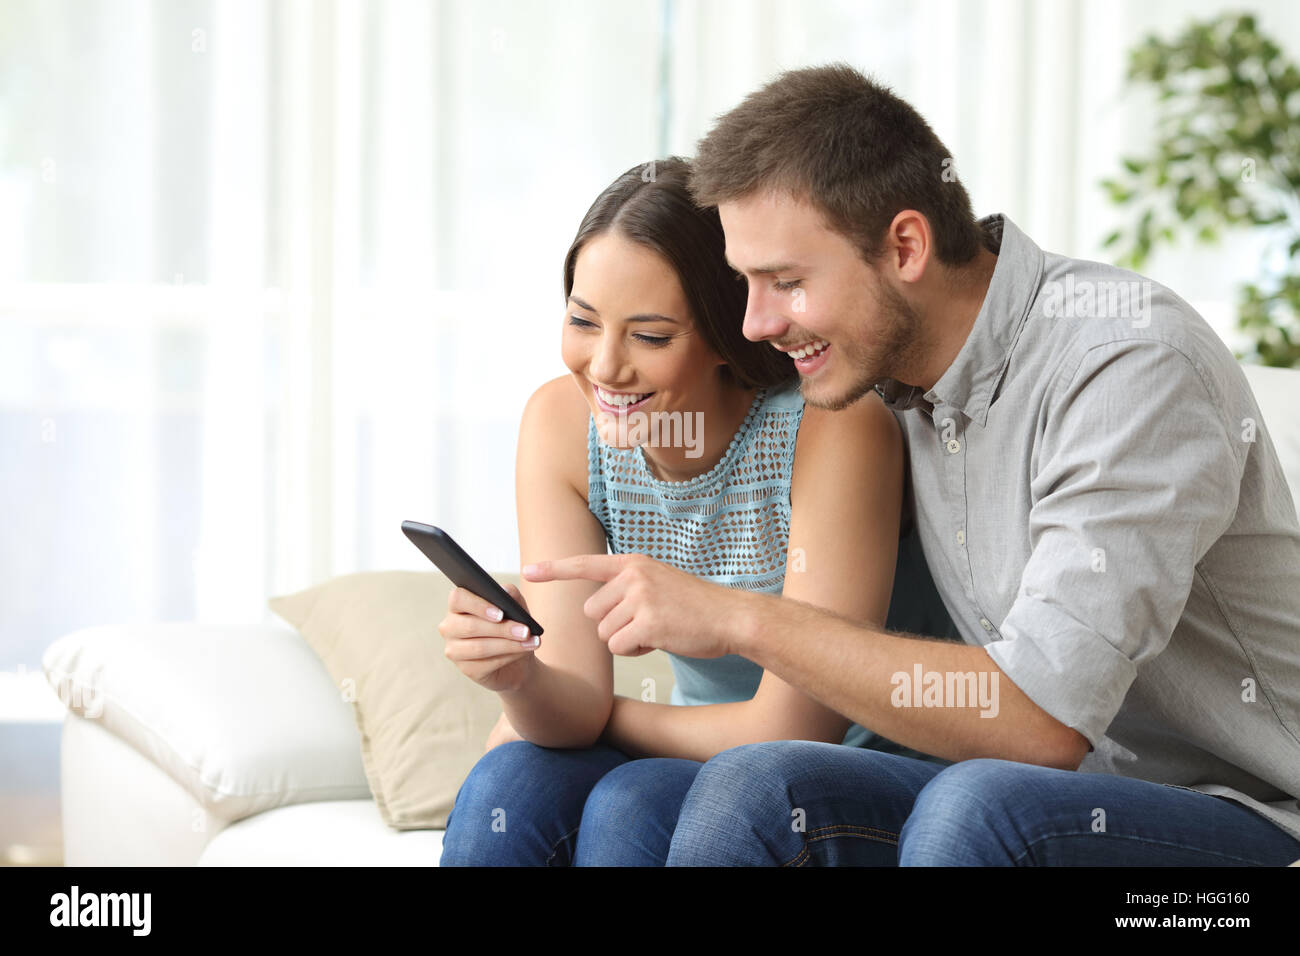 Relaxed couple or friends using a generic mobile phone together sitting on a sofa in the living room at home Stock Photo